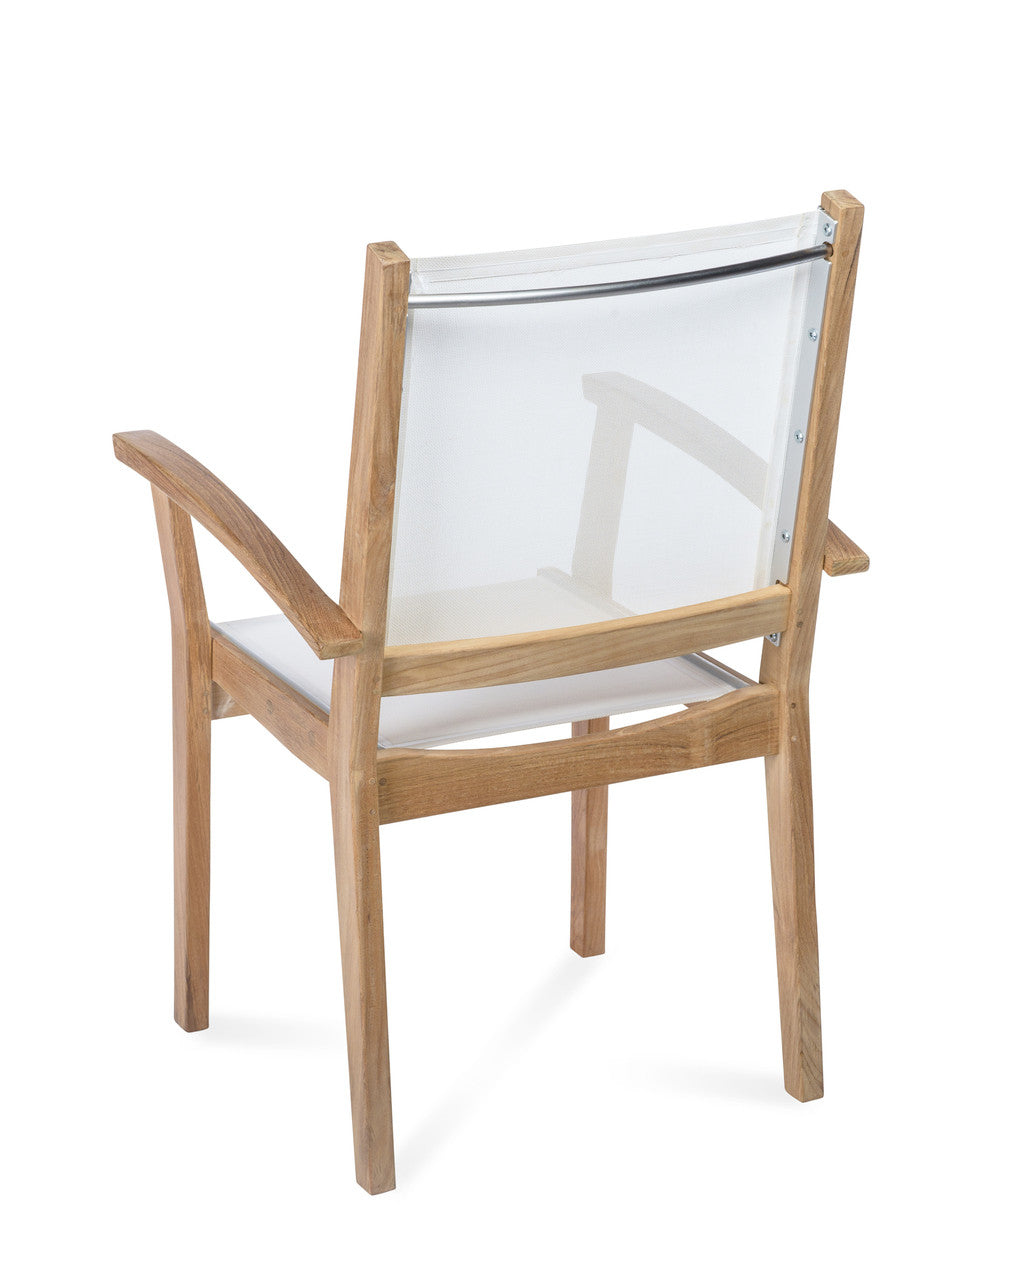 CO9 Design - Bayhead Sling Stacking Teak Armchair | Grey, Navy and White